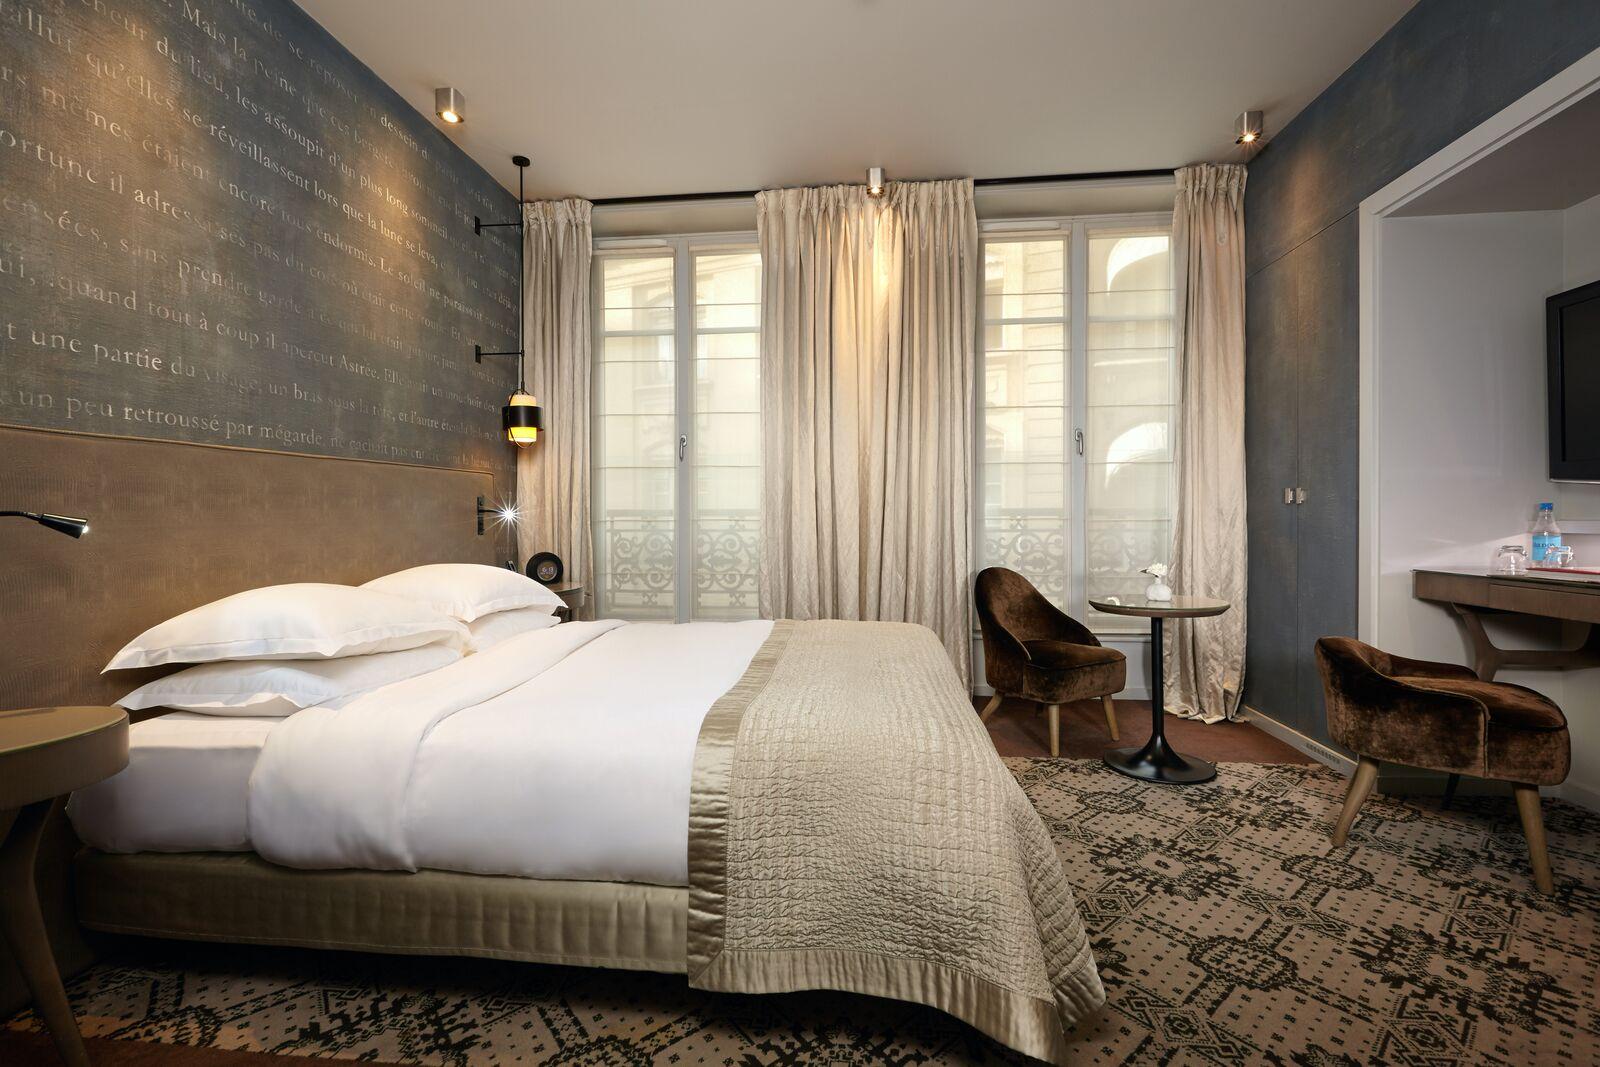 Each suite at Pavillon des Lettres is named after a famous writer